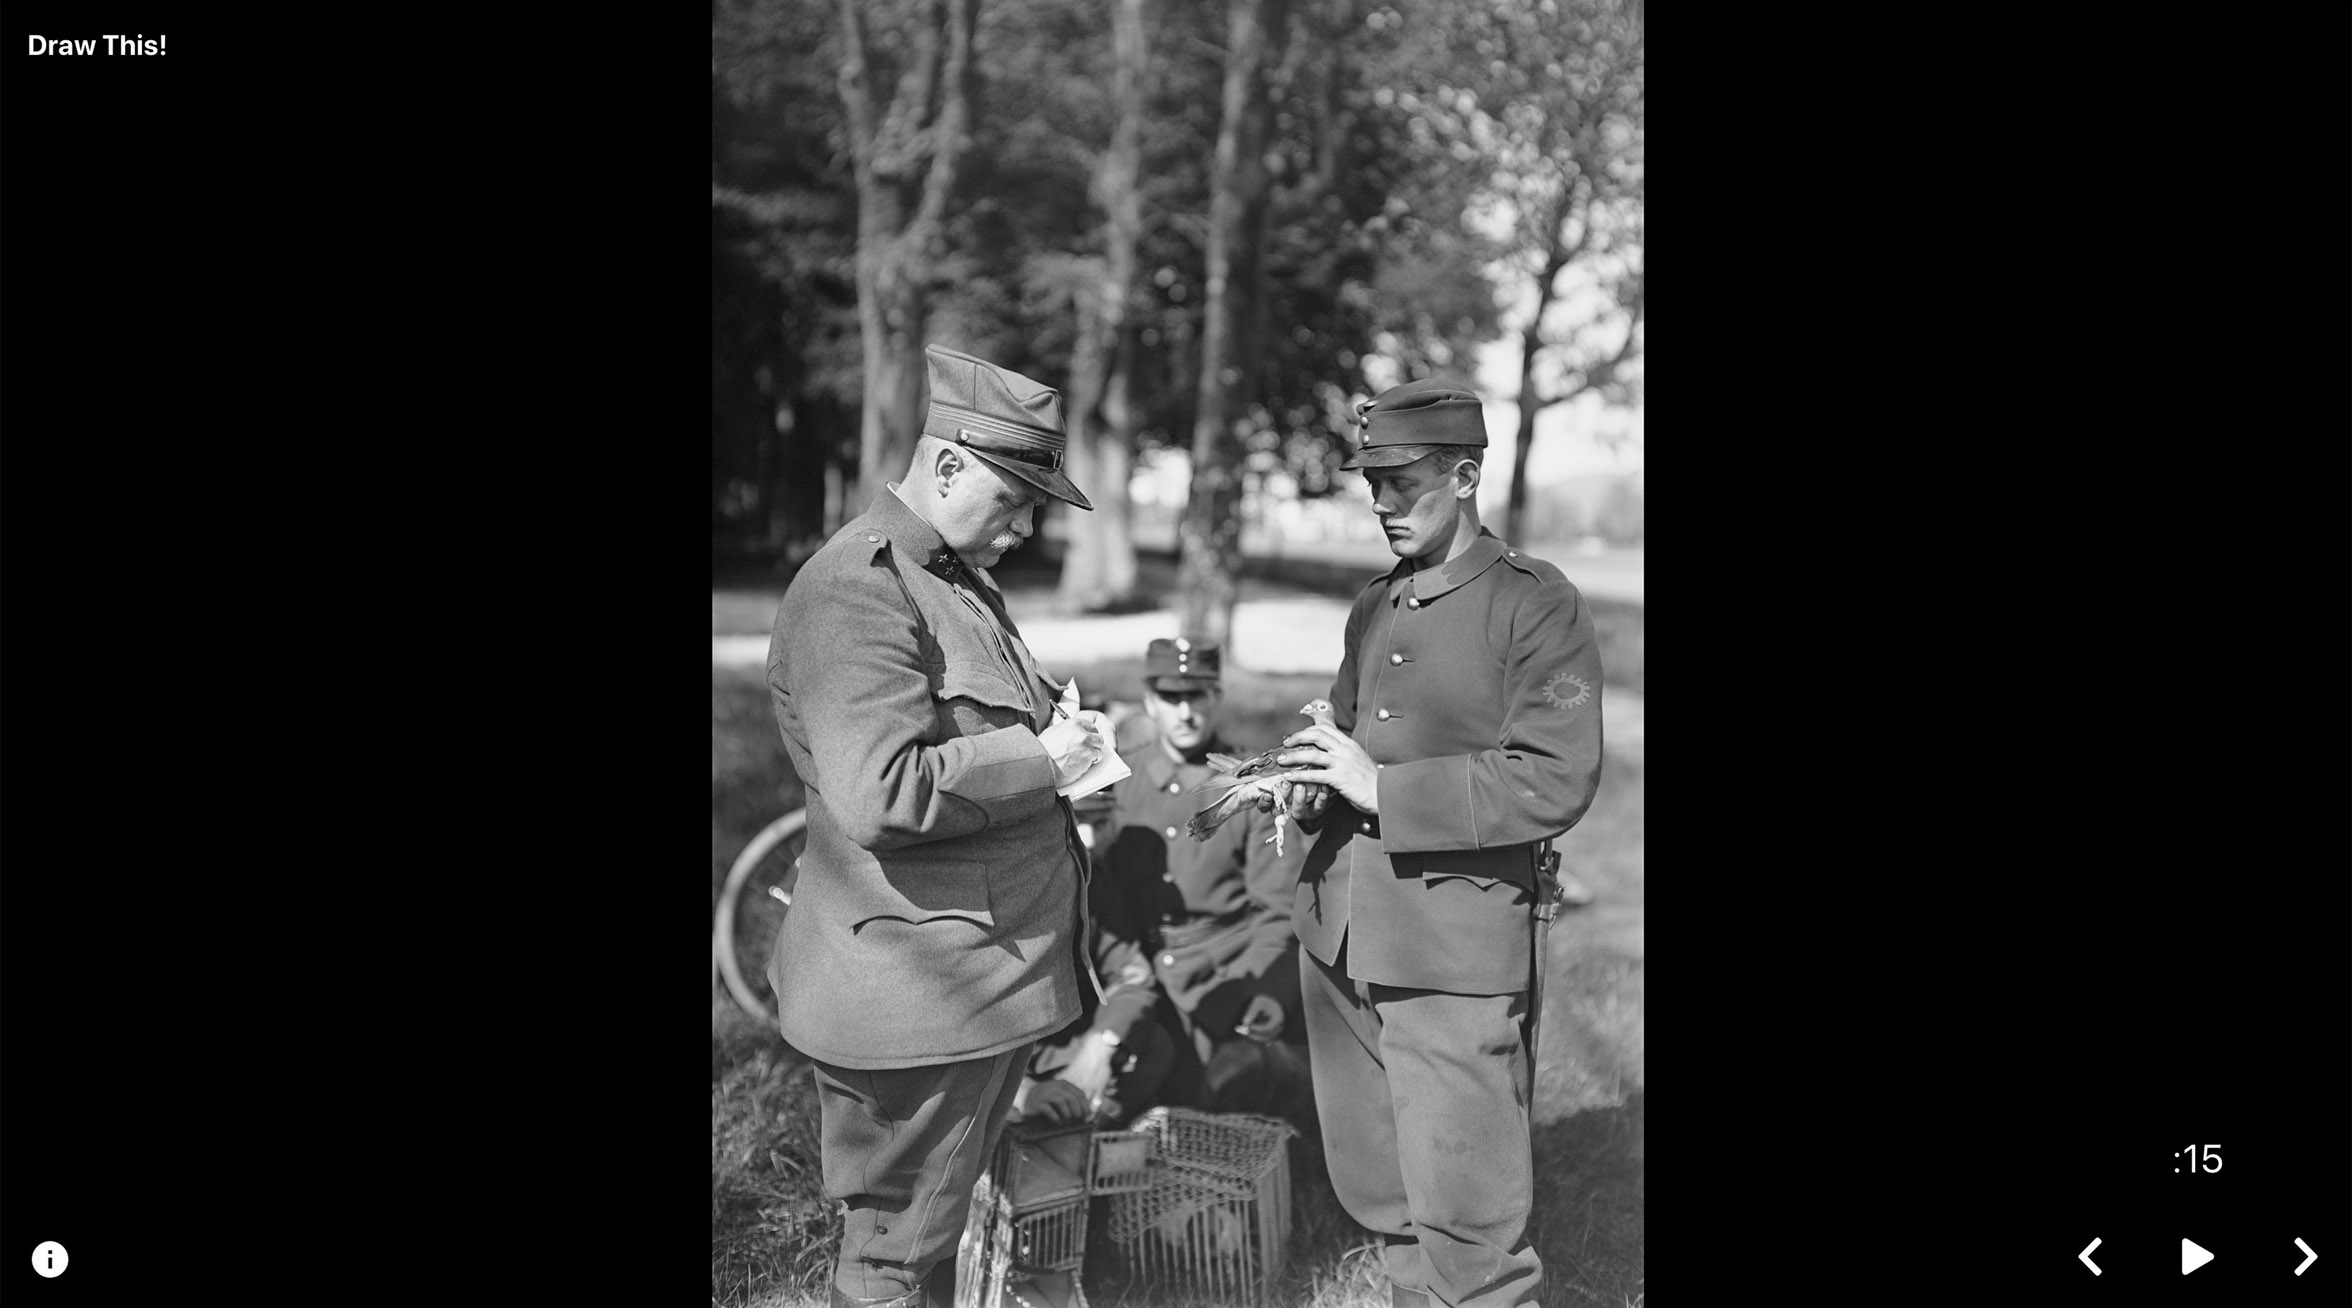 View full size version of app screenshot with black-and-white photograph of soldiers